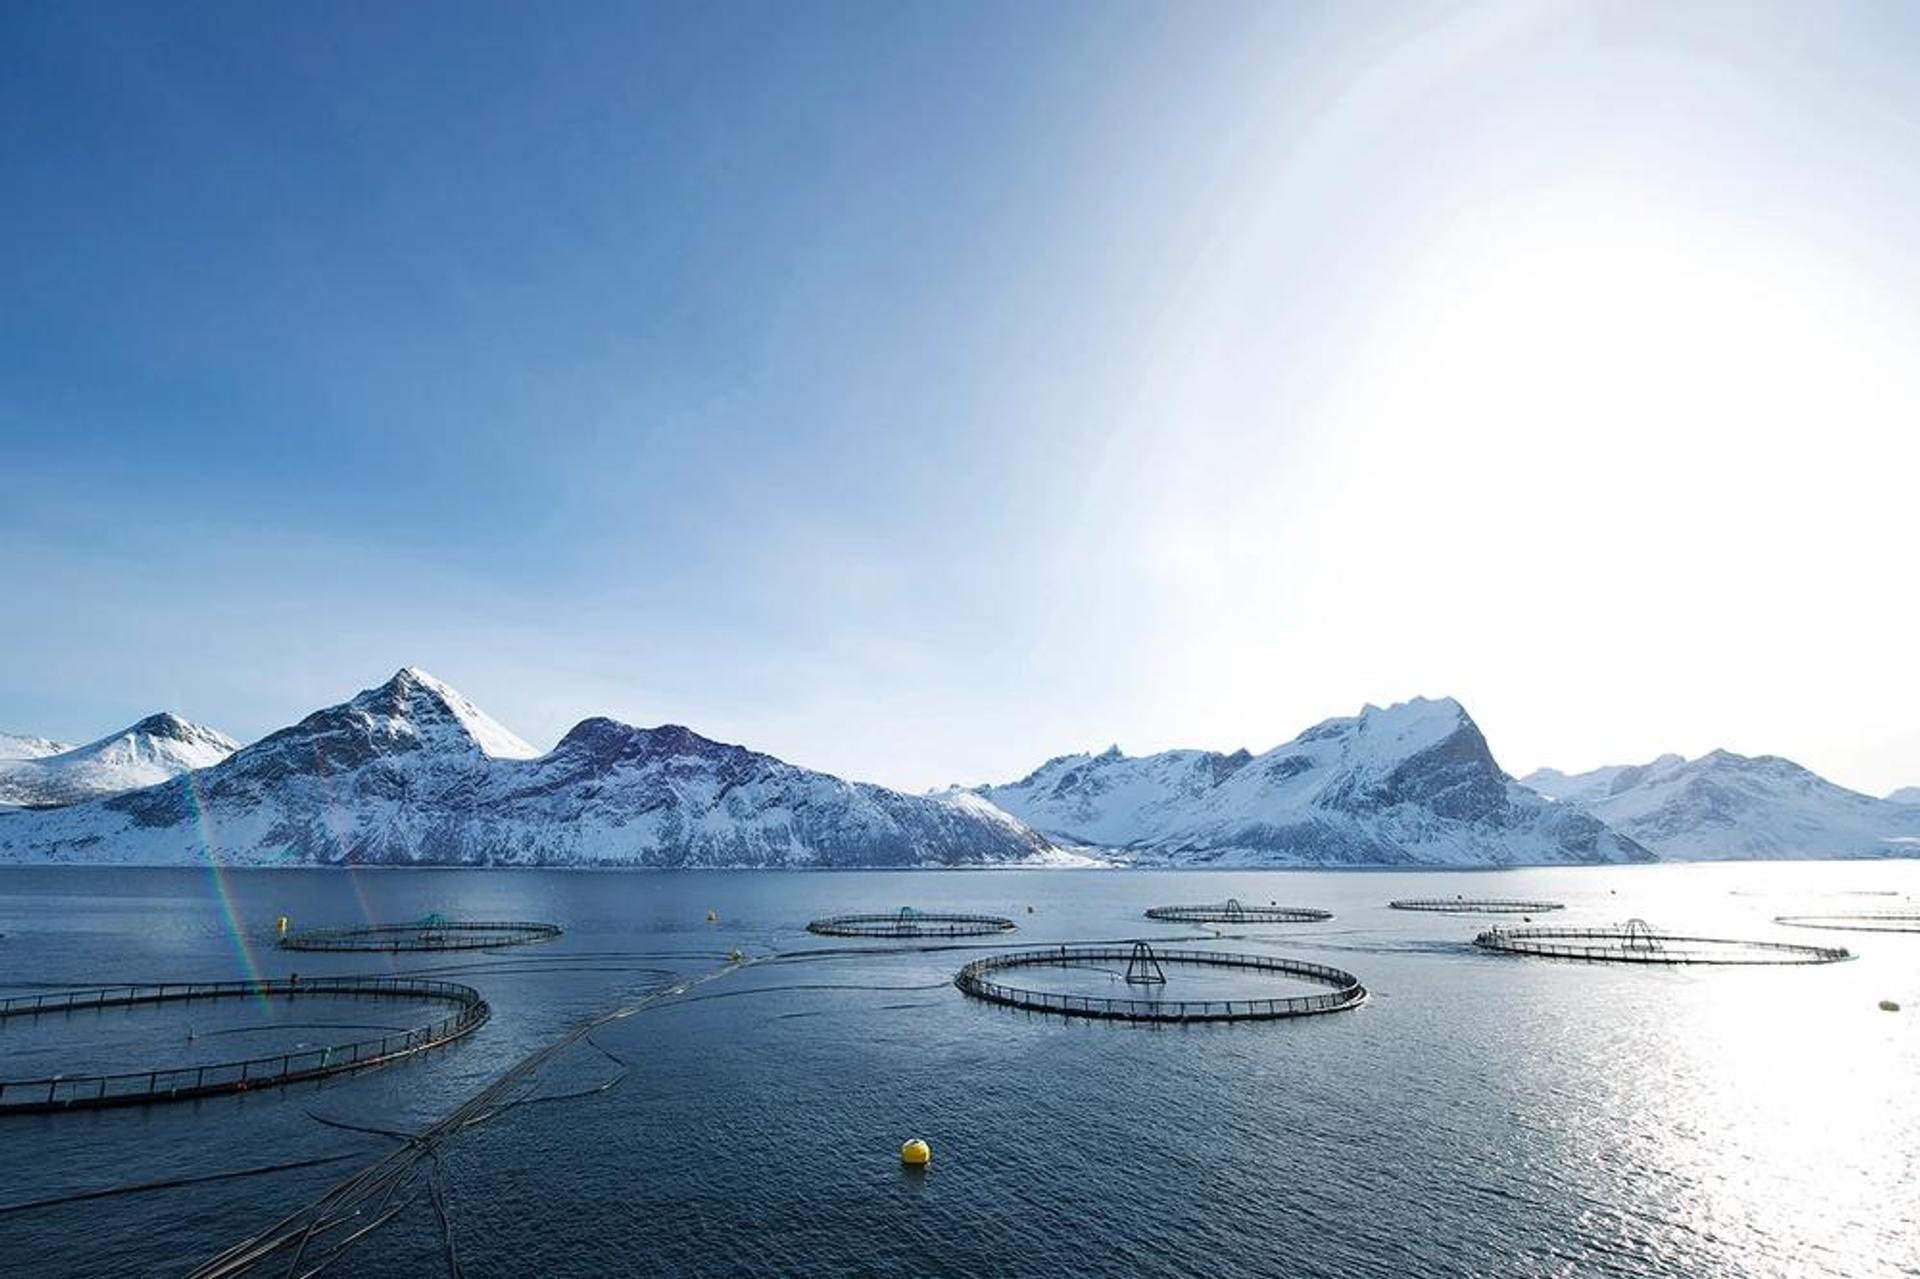 Fish farm with mountains in the background